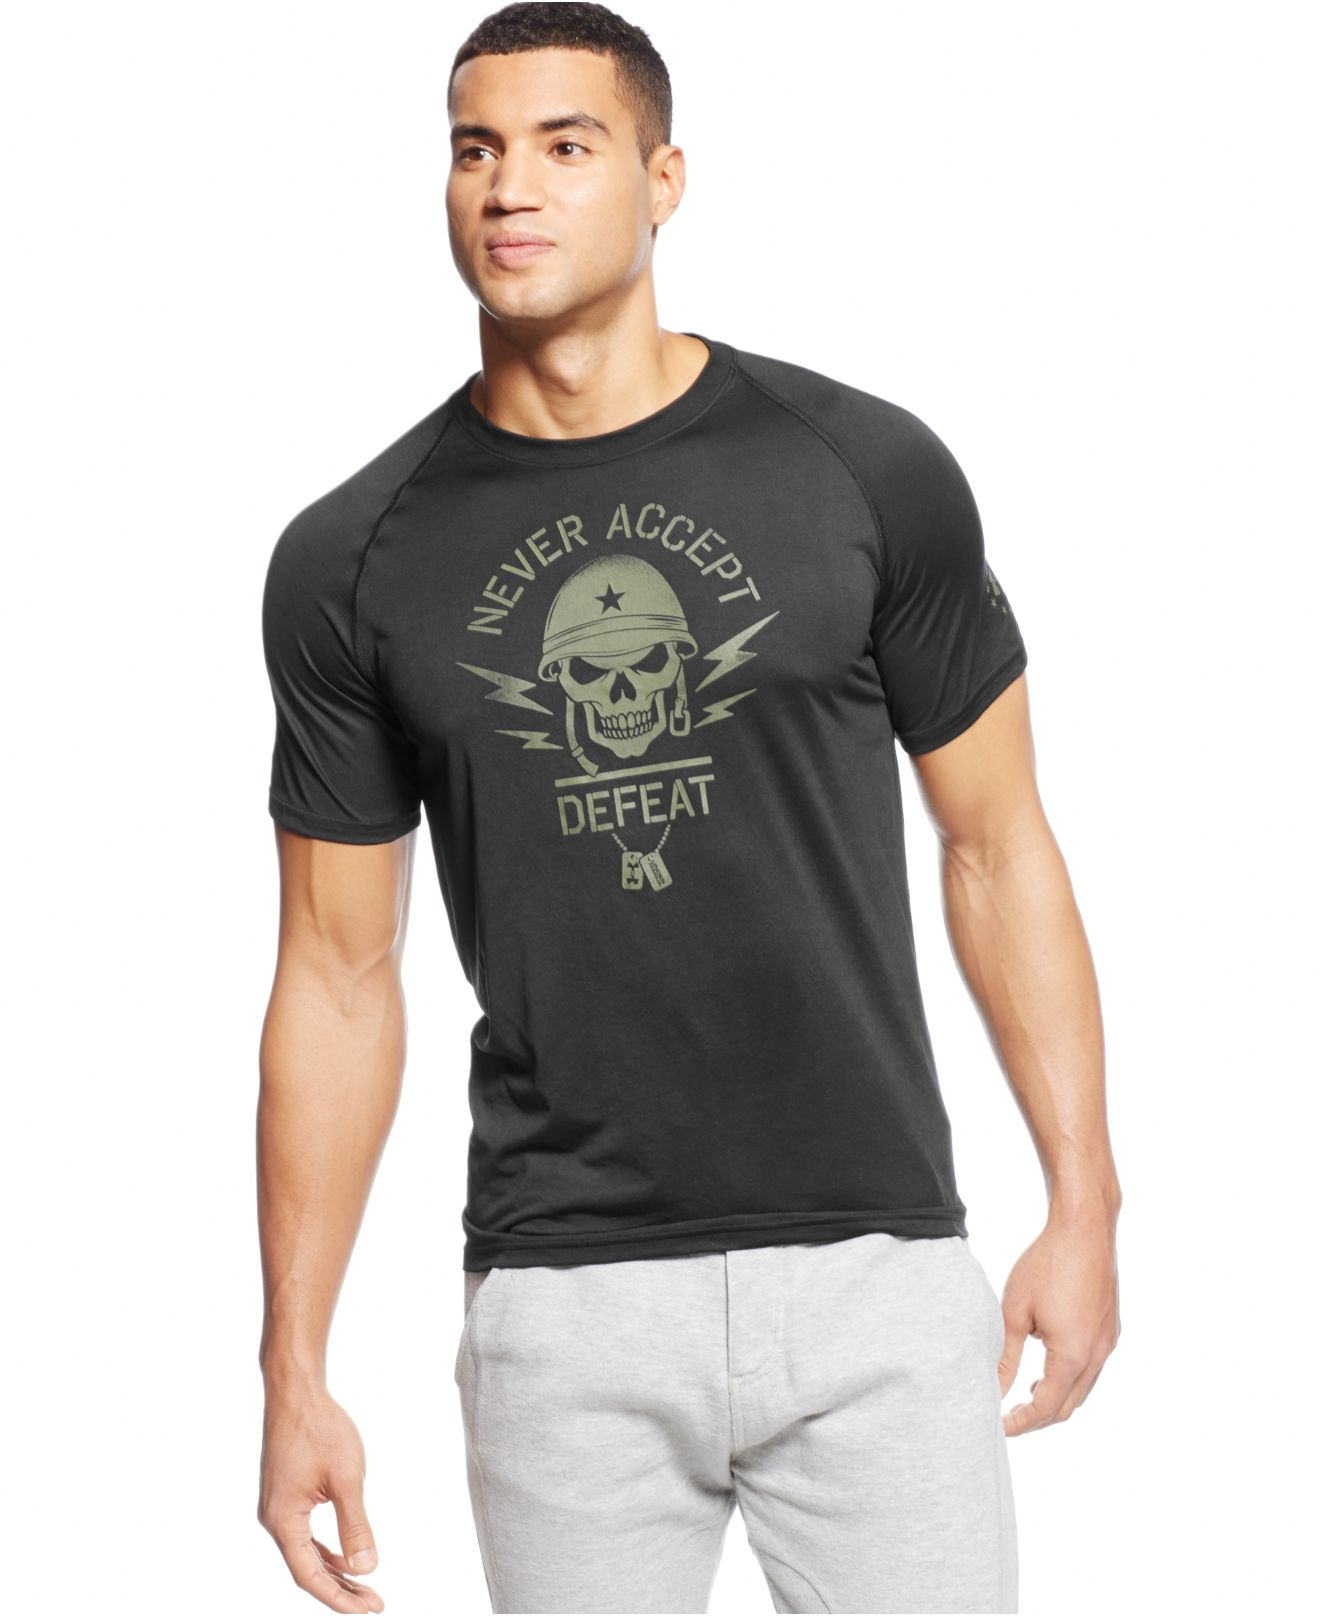 Download Lyst - Under Armour Never Accept Defeat T-shirt in Black ...